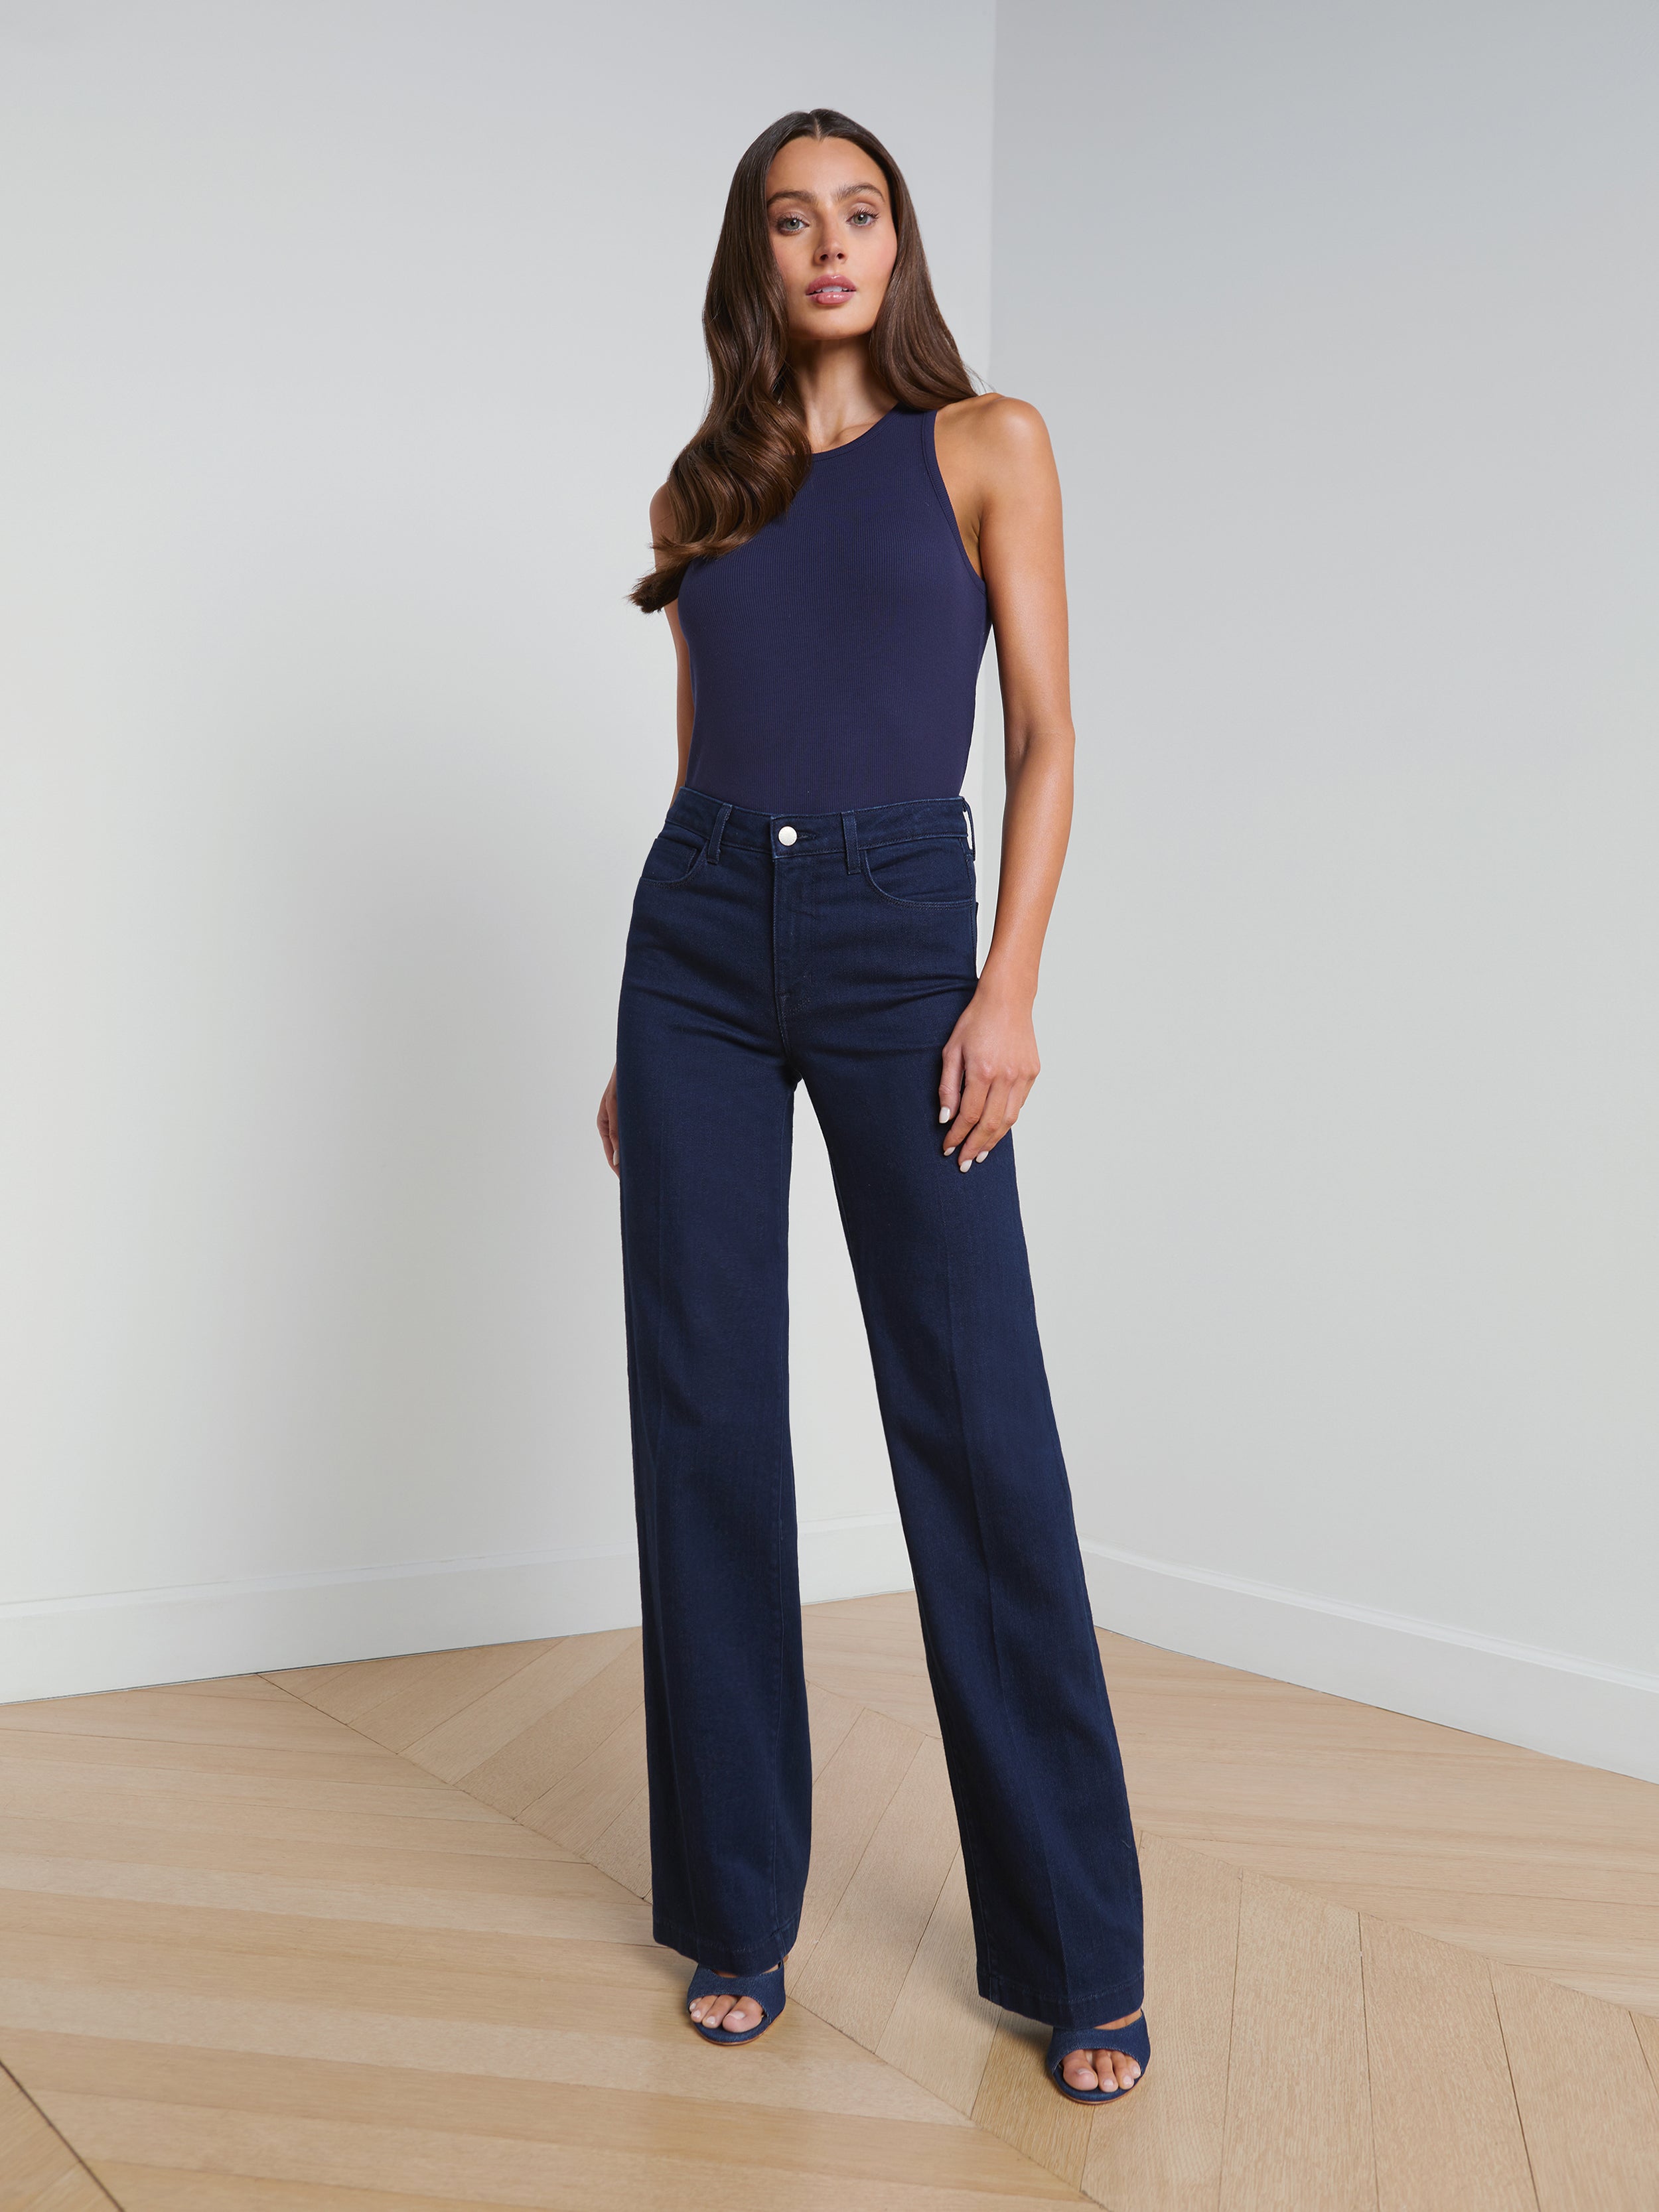 L'AGENCE - Clayton High-Rise Wide-Leg Jean in Palomino